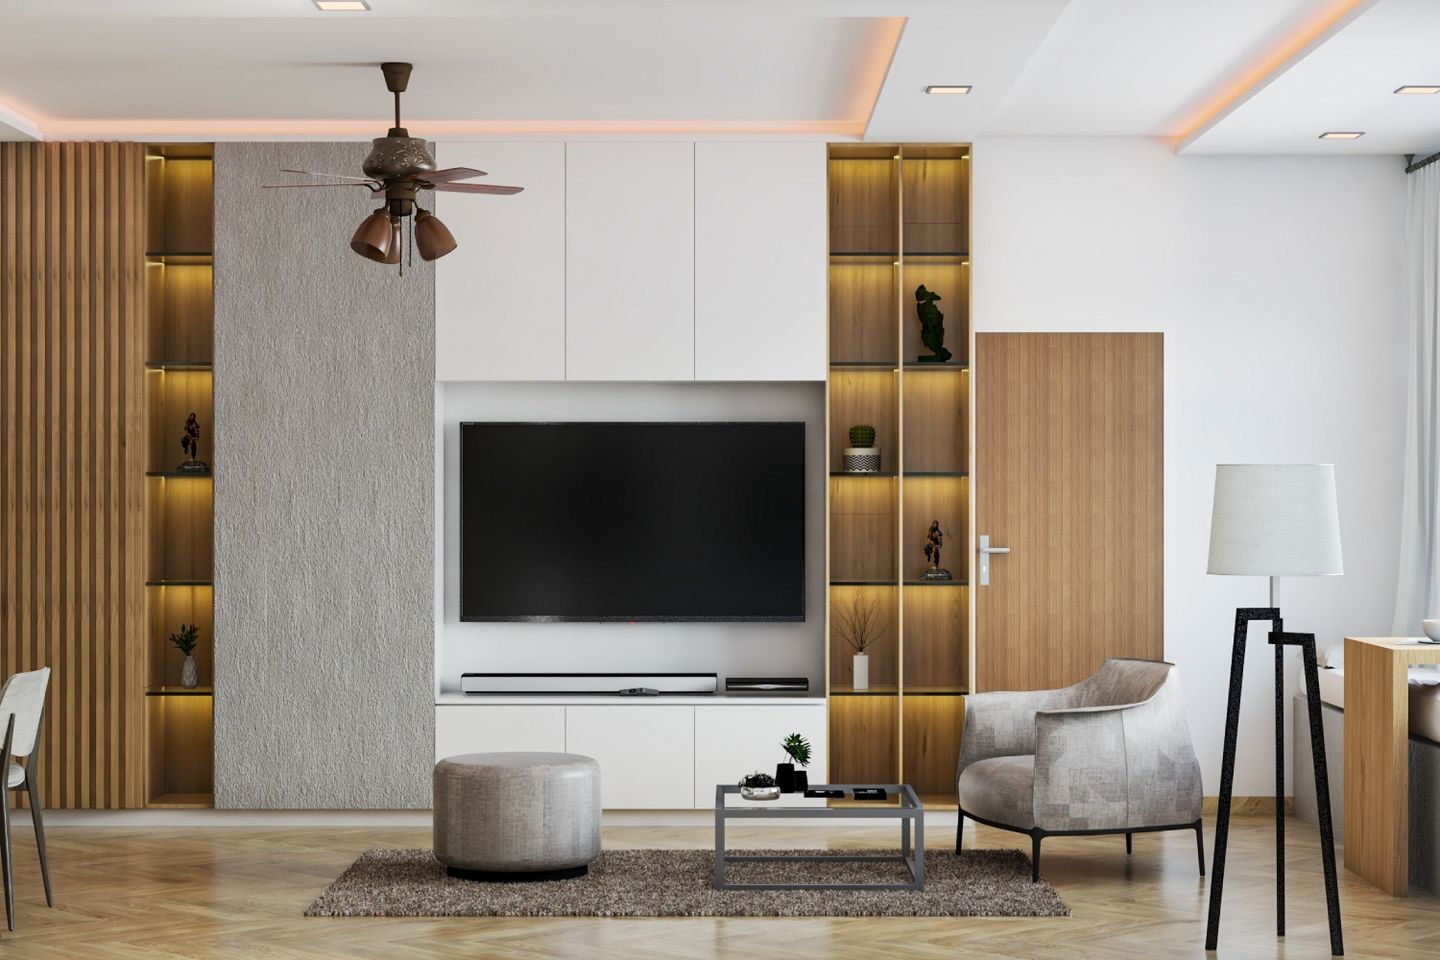 Contemporary Interior Design With A Wall-Mounted TV Unit With Open Storage And Cove Lights - Livspace